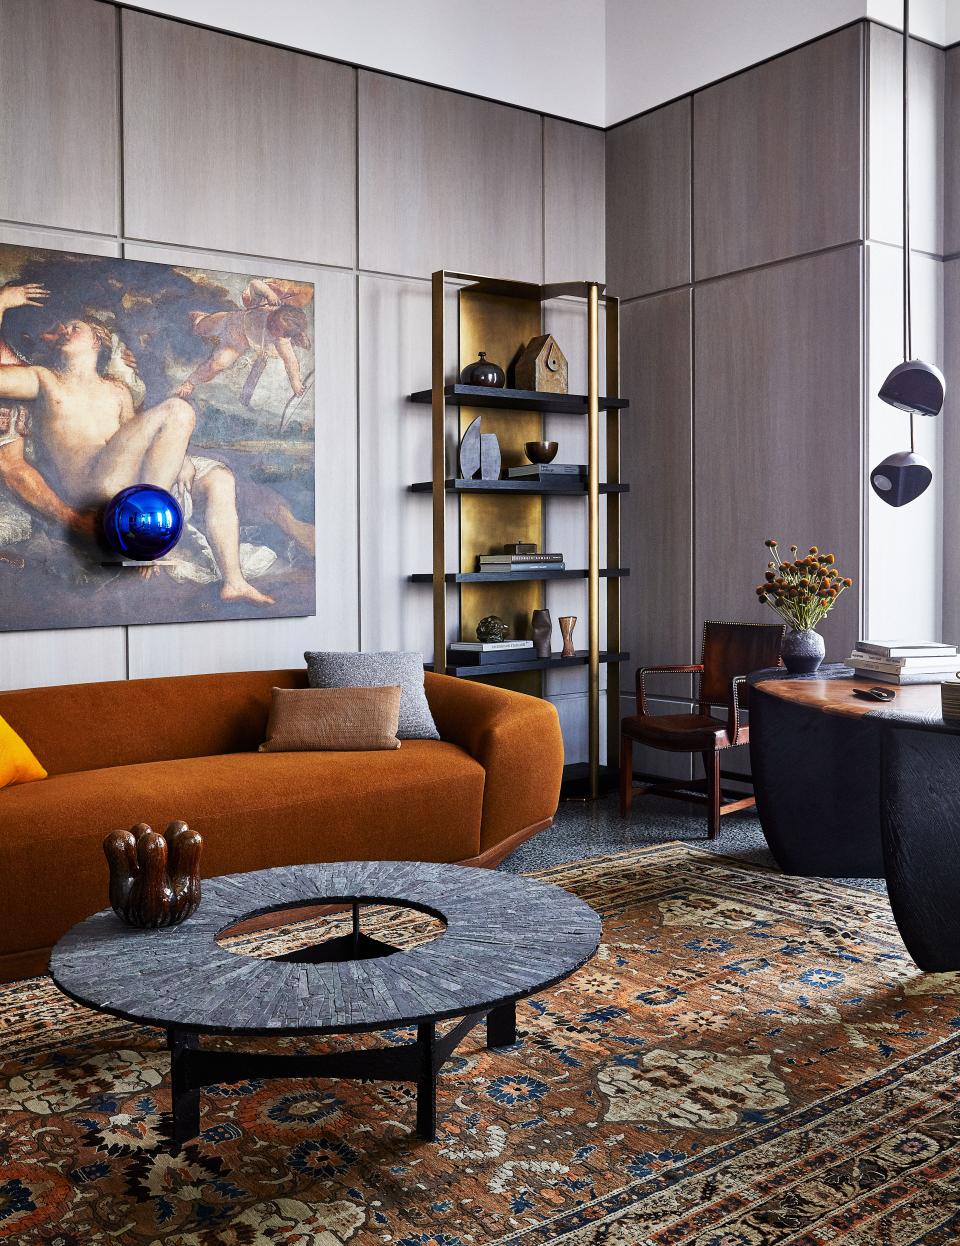 In the husband’s office, an artwork by Jeff Koons hangs above a custom sofa in a Rogers & Goffigon Wool. Pia Manu cocktail table; Kaare Klint chair from Dienst + Dotter; antique Persian Rug.